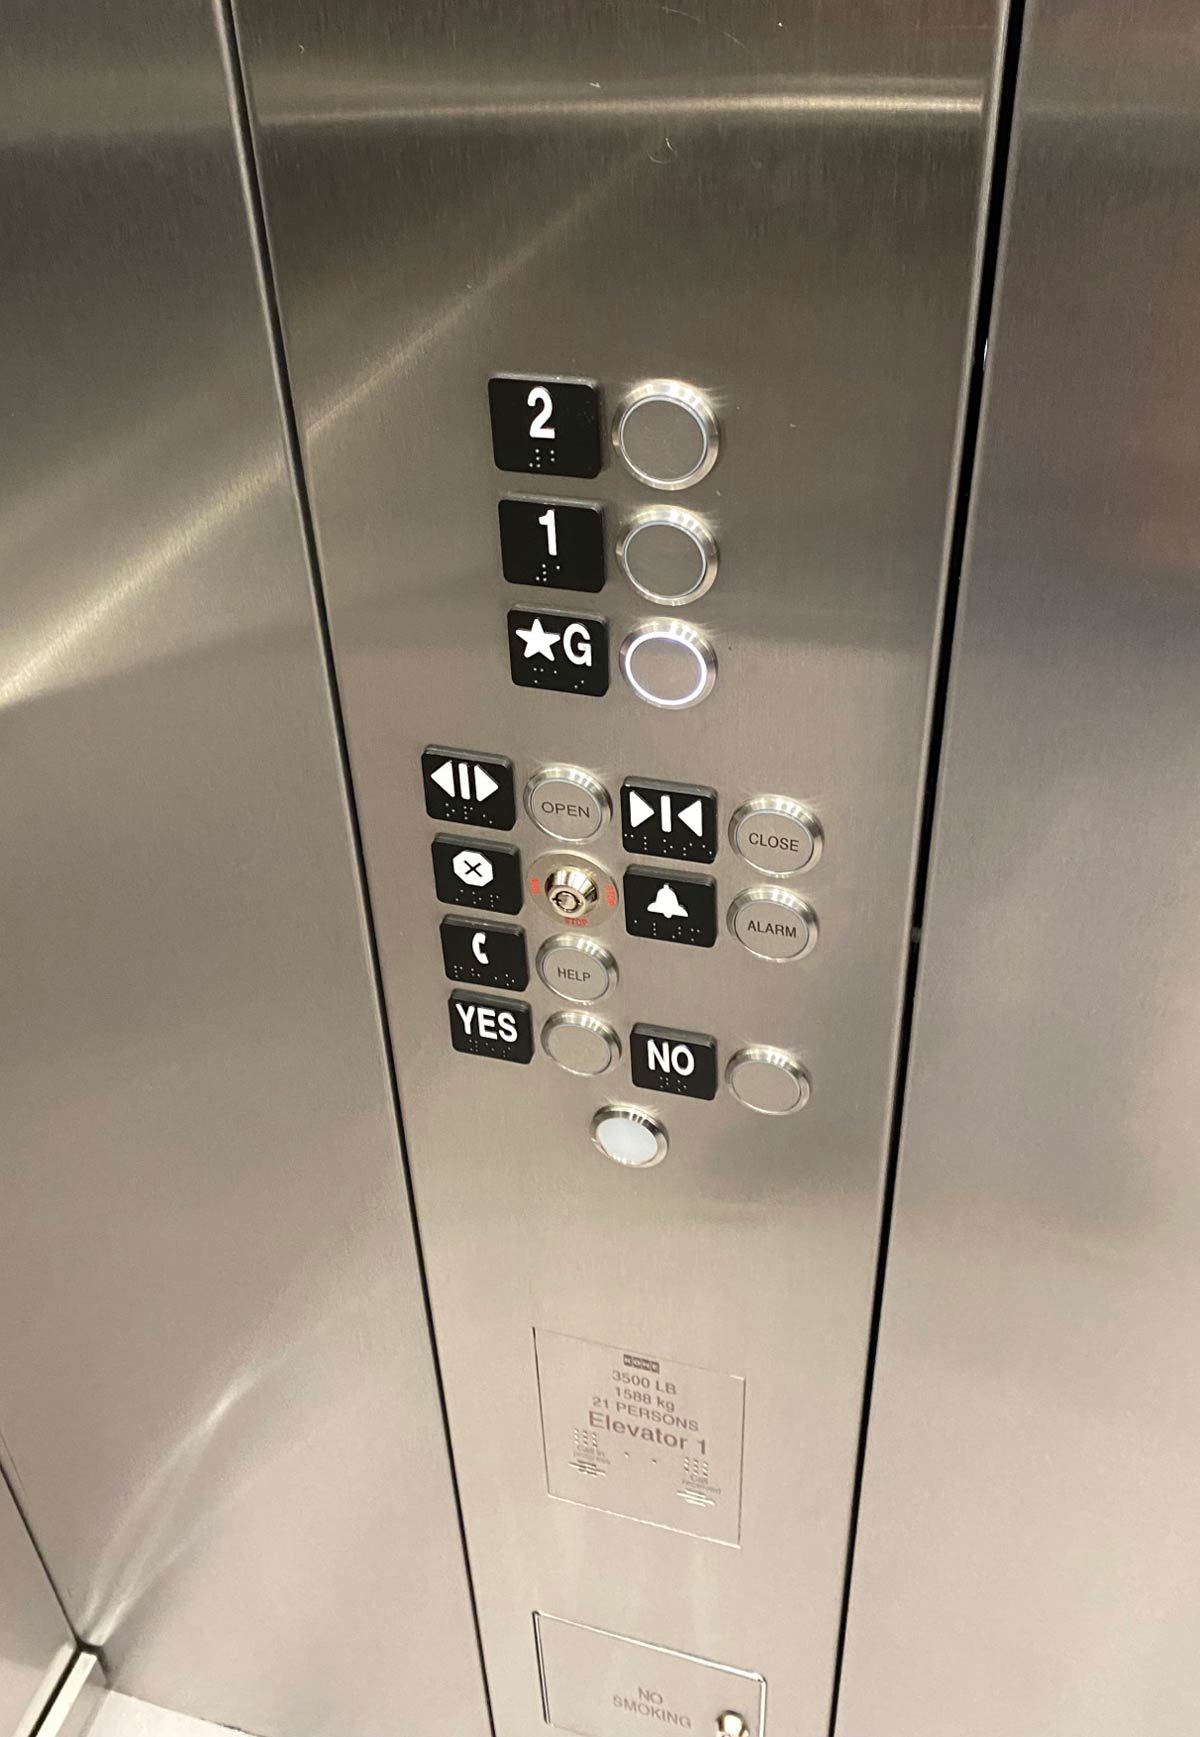 Yes and No buttons on the elevator where I work